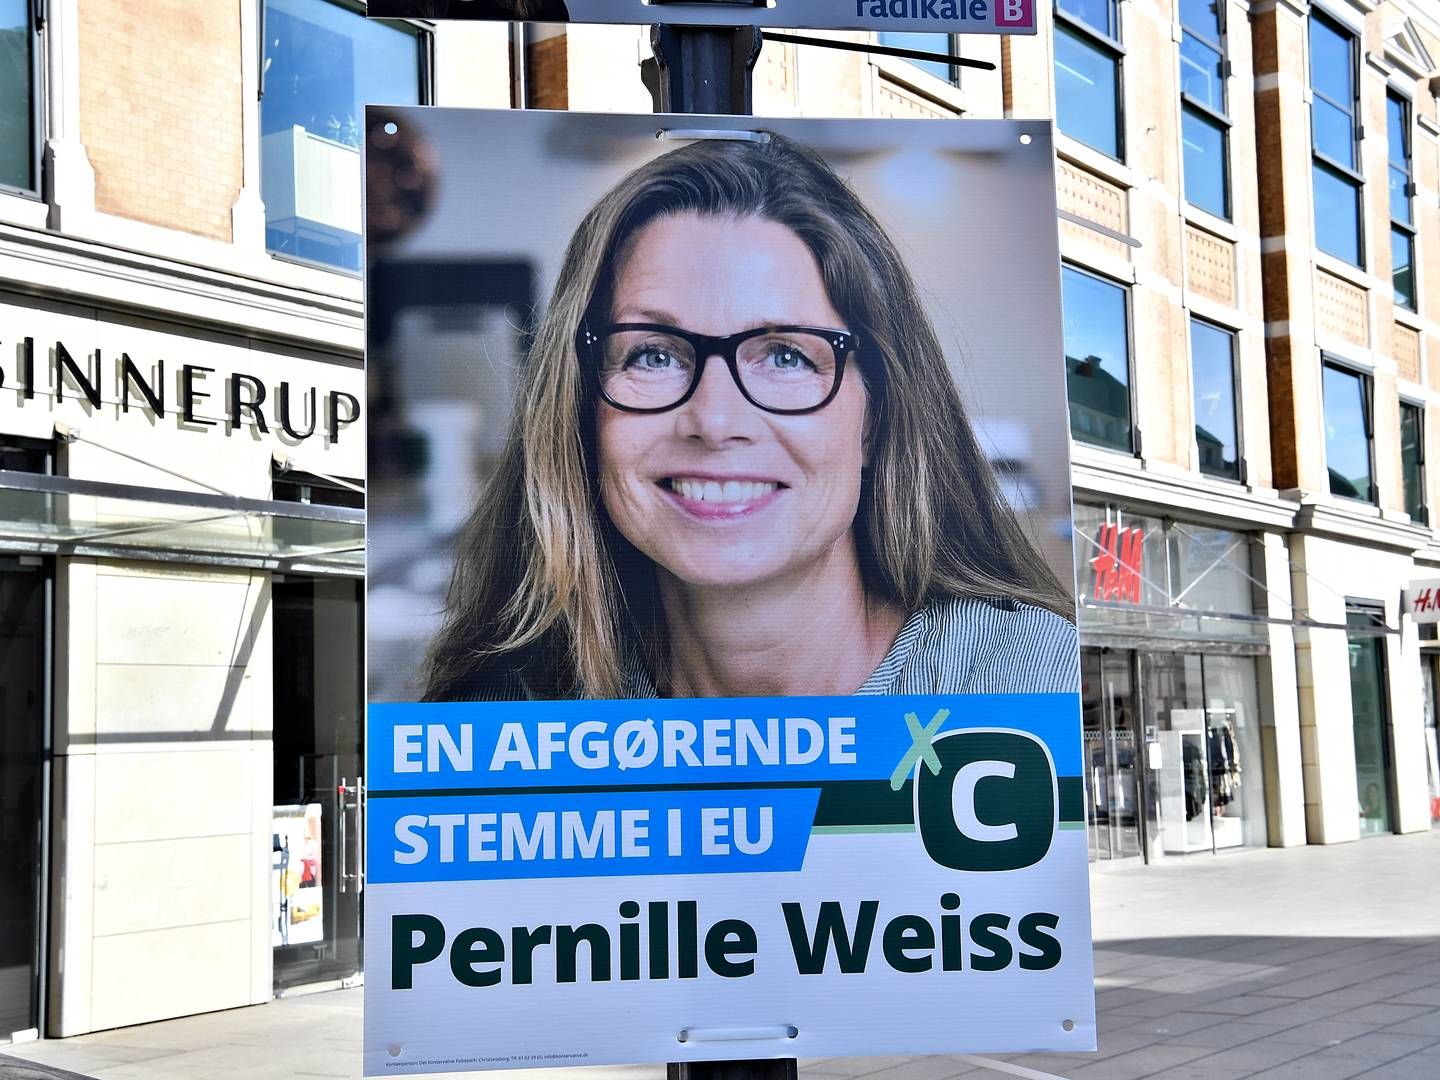 Danish campaign poster for Pernille Weiss | Photo: Ernst van Norde